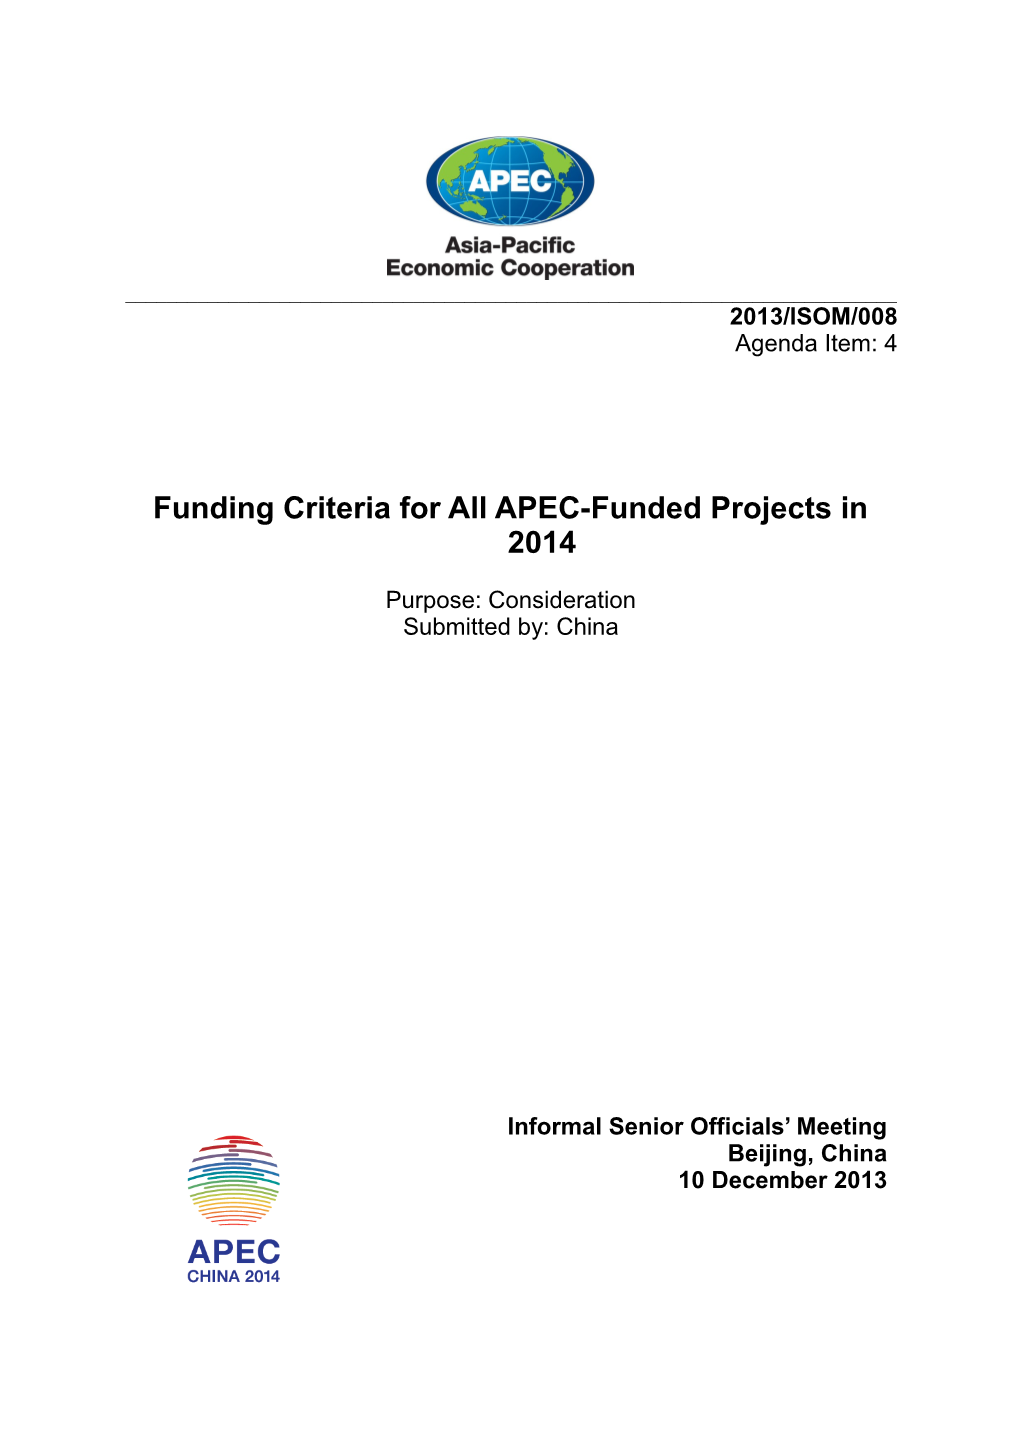 Funding Criteria for All APEC-Funded Projects in 2014